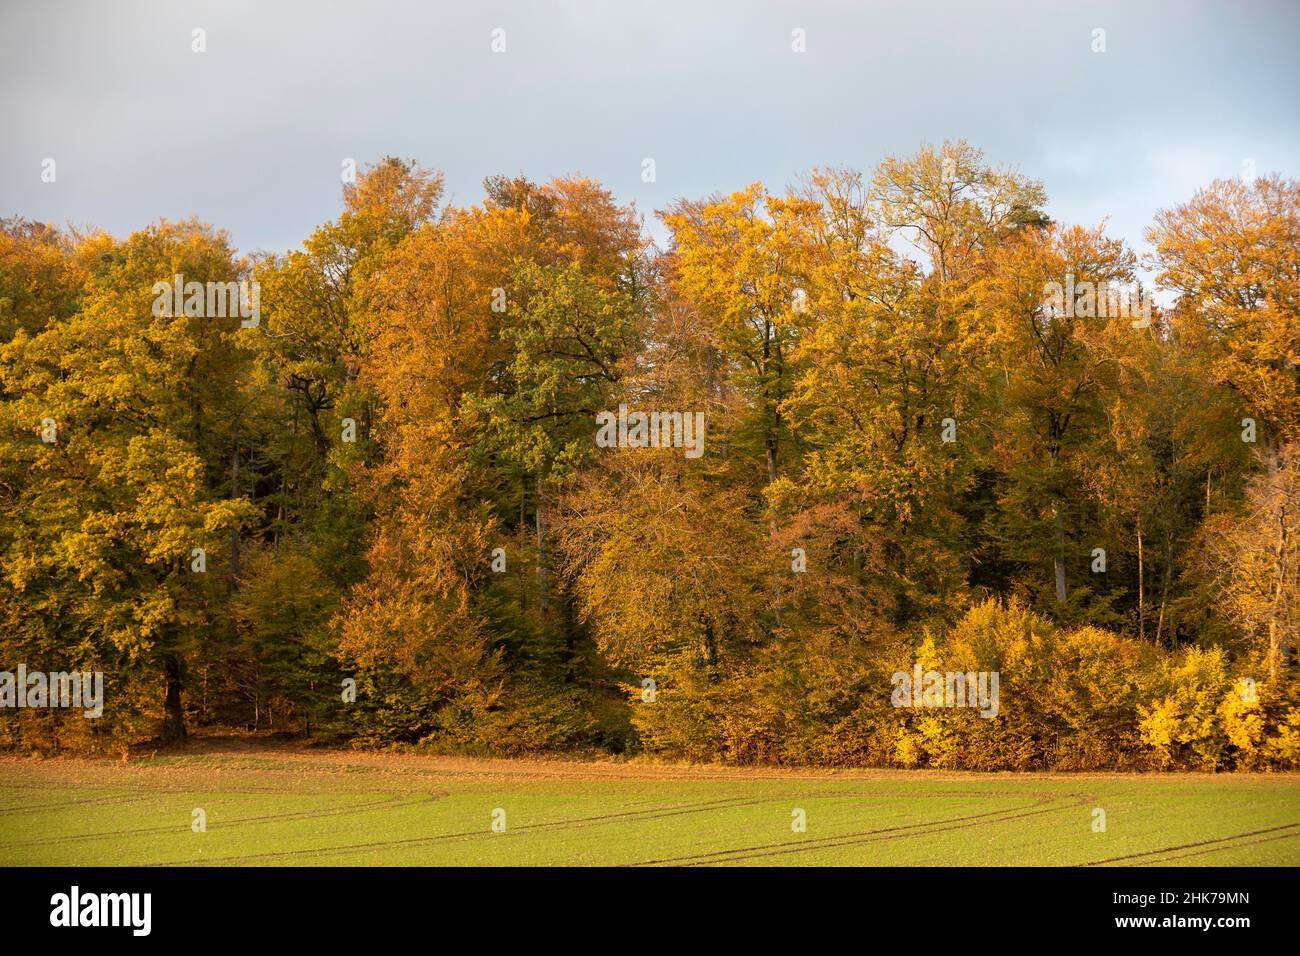 Autumn atmosphere in diffuse light at the edge of the forest, Hof Hoefen, Allensbach, Baden-Wuerttemberg, Germany Stock Photo